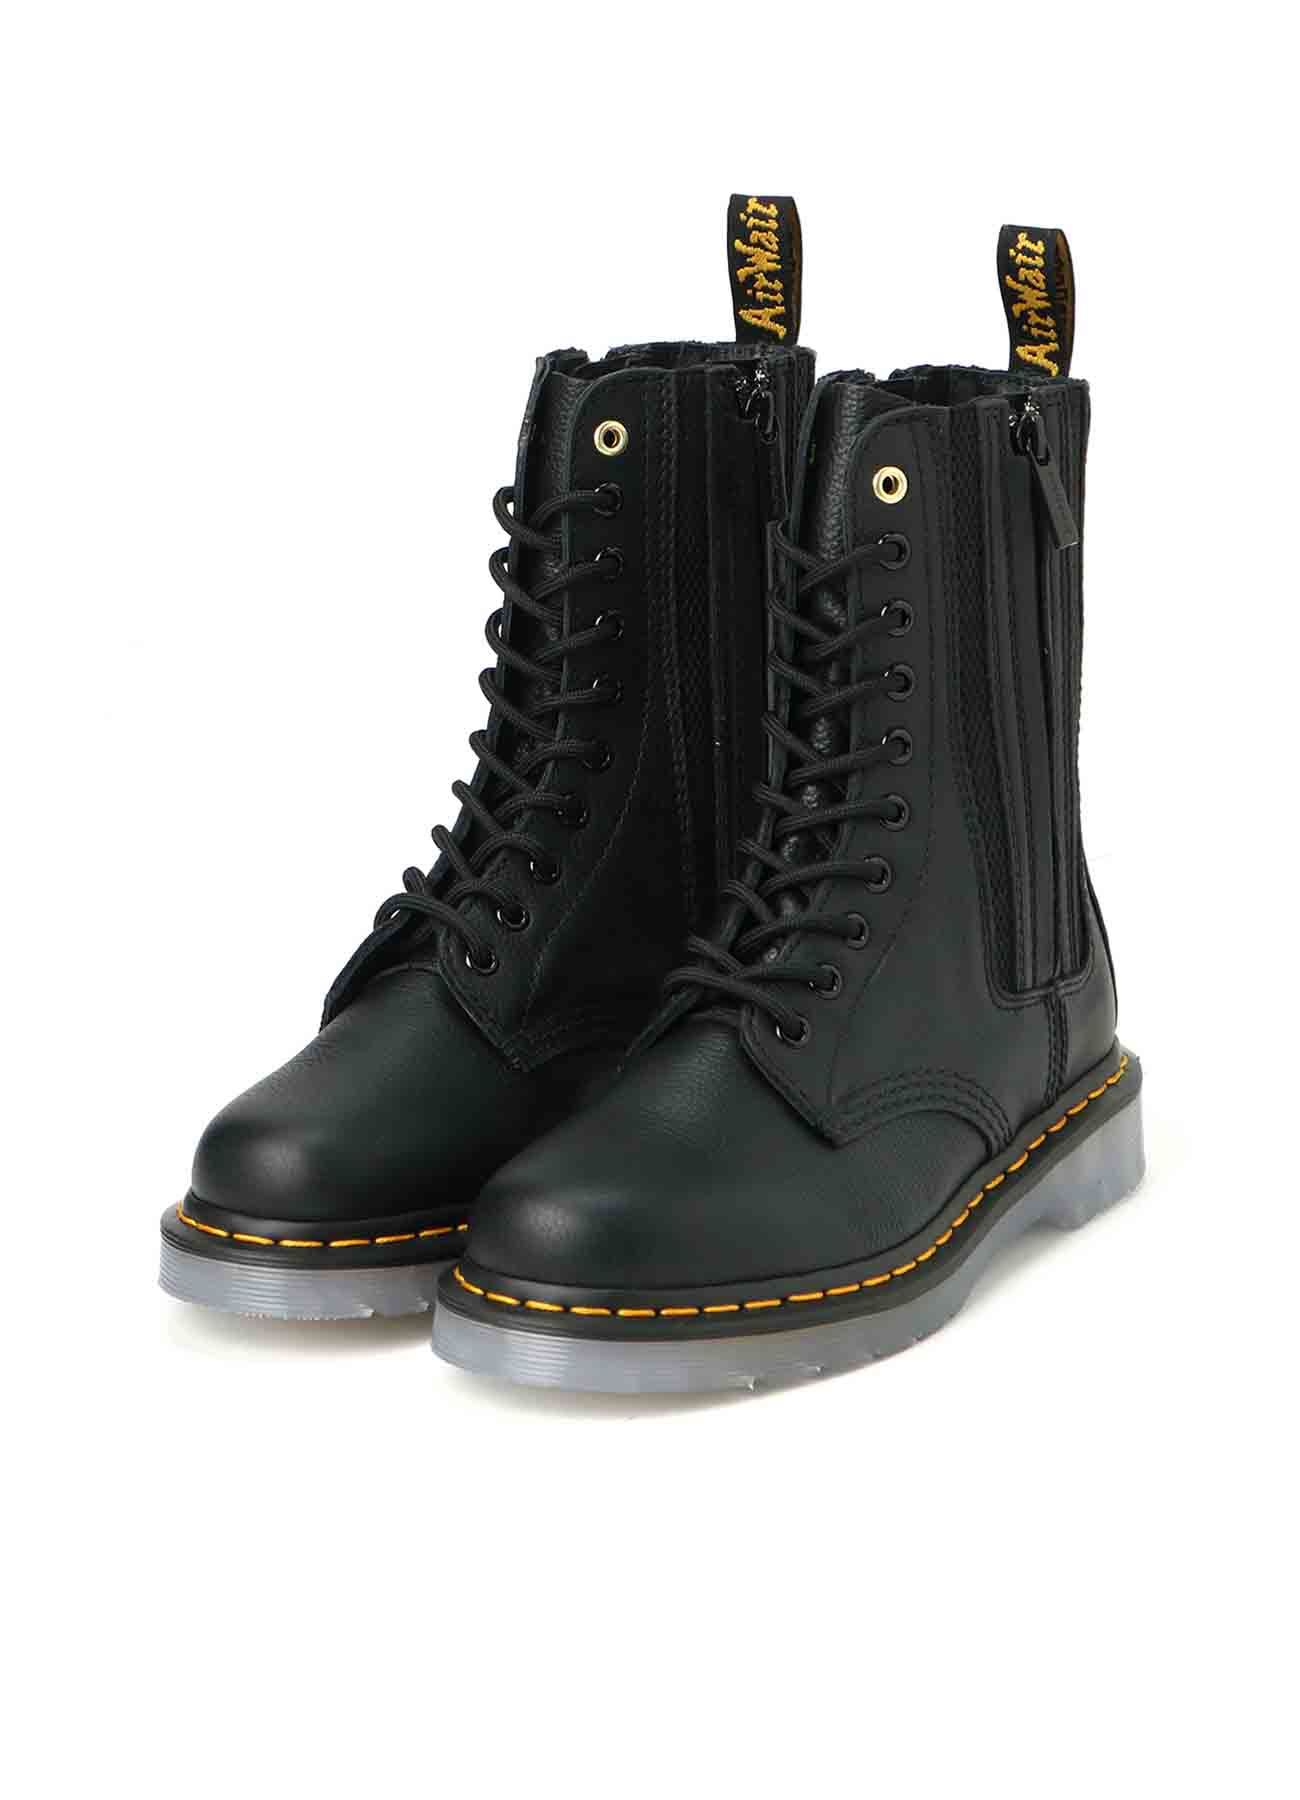 DR MARTENS 10-EYE SIDE GORE BOOTS